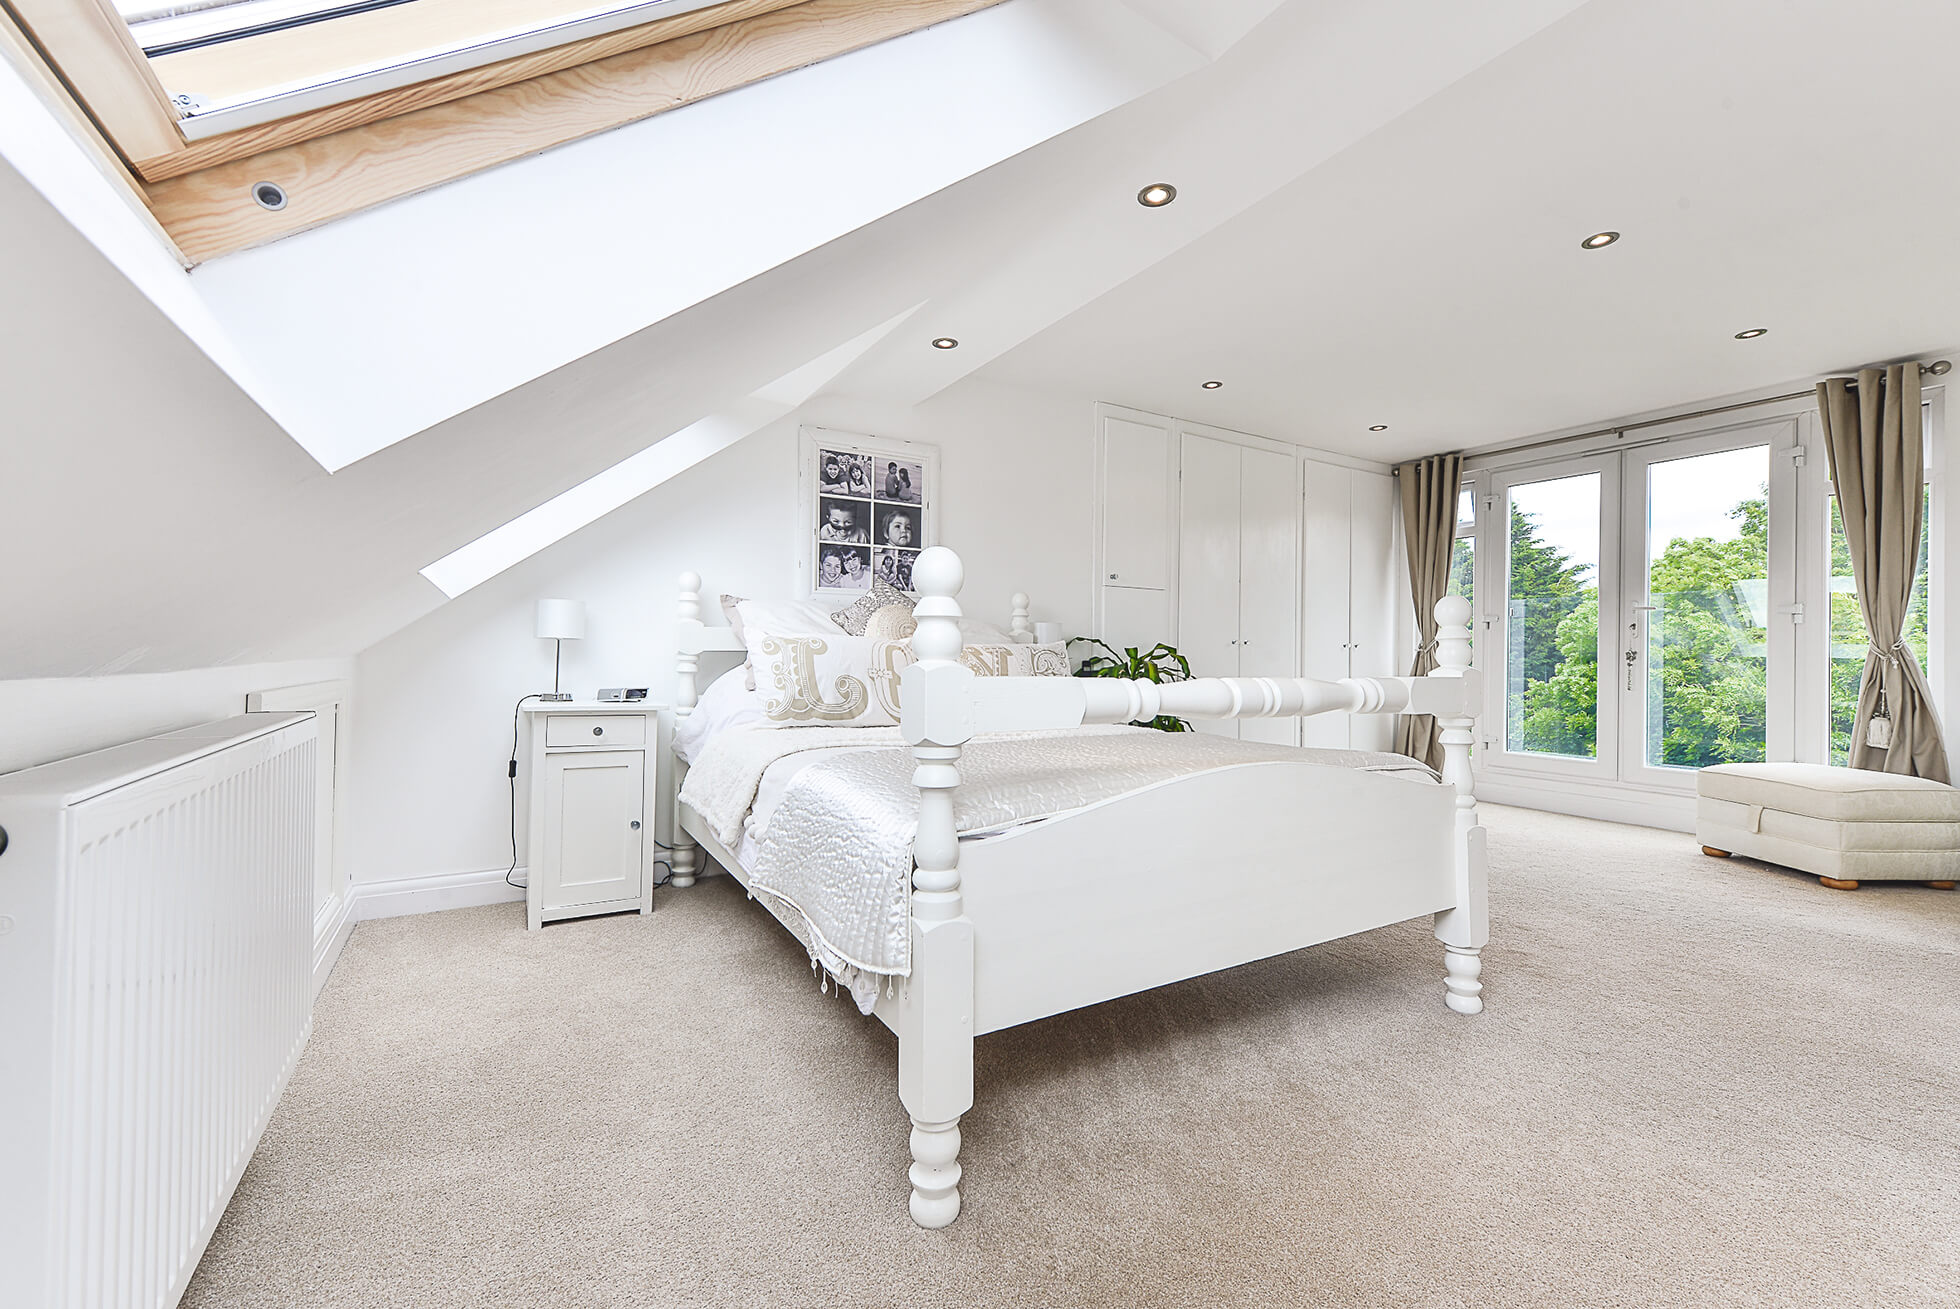 Do you have a question about converting your Loft in Chiswell Green? Here are the most popular questions asked by our clients.